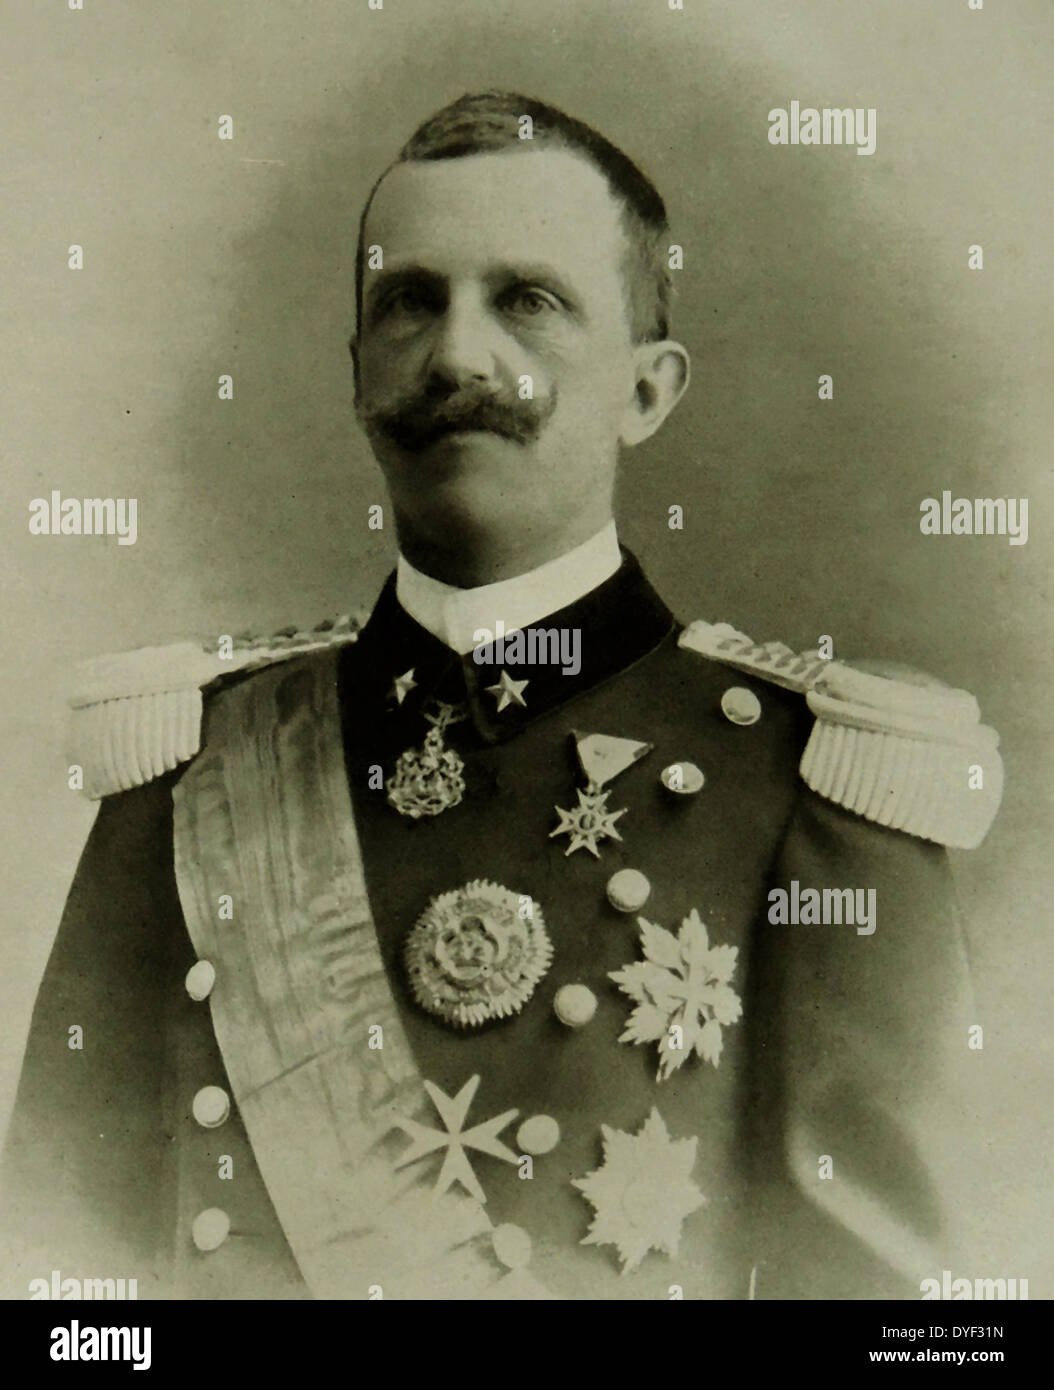 Victor Emmanuel III of Italy, 1869 – 1947. member of the House of Savoy and King of Italy (29 July 1900 – 9 May 1946). In addition, he claimed the thrones of Ethiopia and Albania as Emperor of Ethiopia (1936–41) and King of the Albanians (1939–43), which were unrecognised by the Great Powers. During his long reign (46 years), which began after the assassination of his father Umberto I, the Kingdom of Italy became involved in two World Wars. His reign also encompassed the birth, rise, and fall of Italian Fascism. 1905 Stock Photo